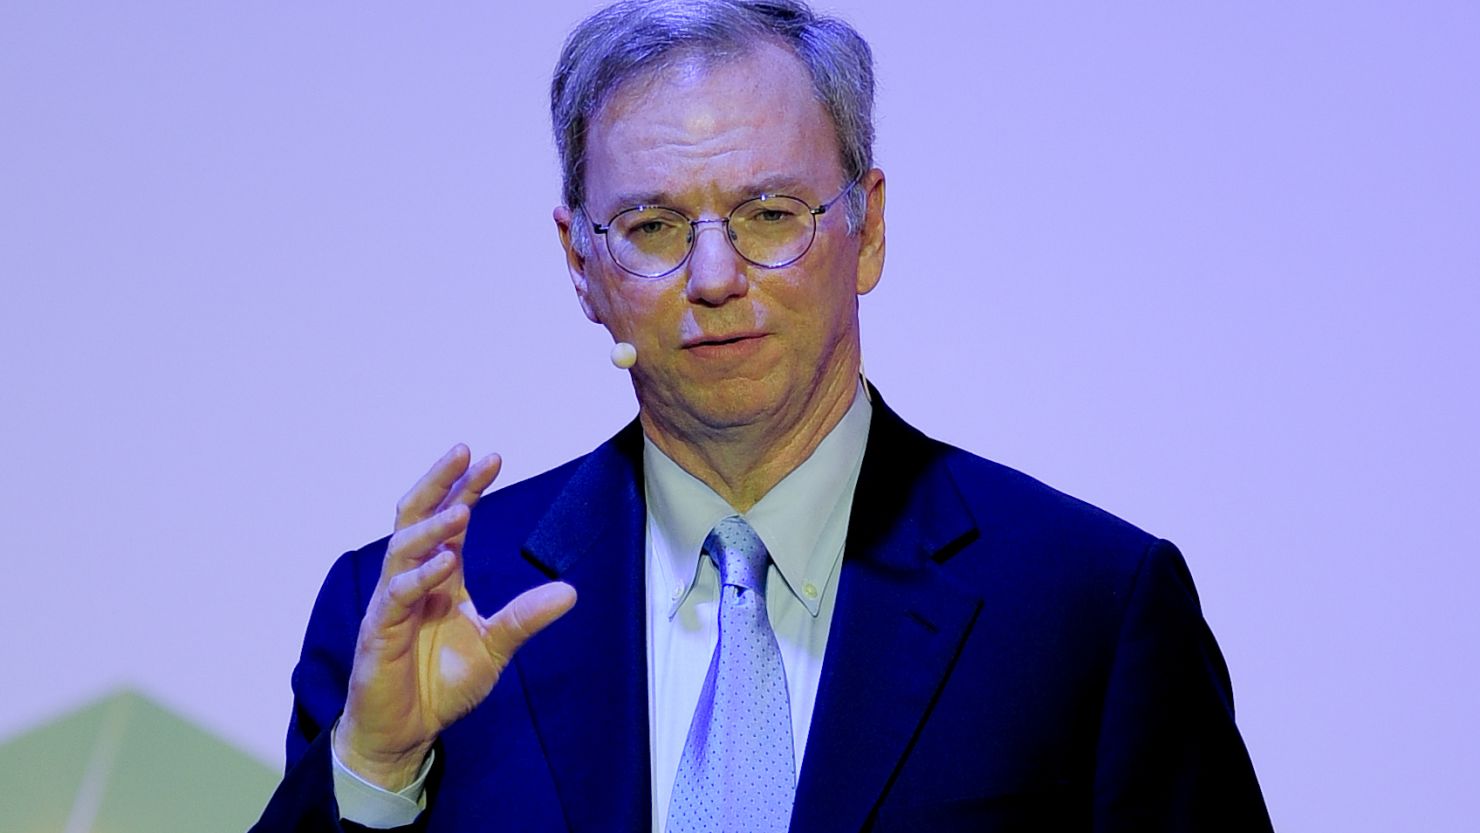 Google's Eric Schmidt told the Mobile World Congress that technology could be a great leveler.